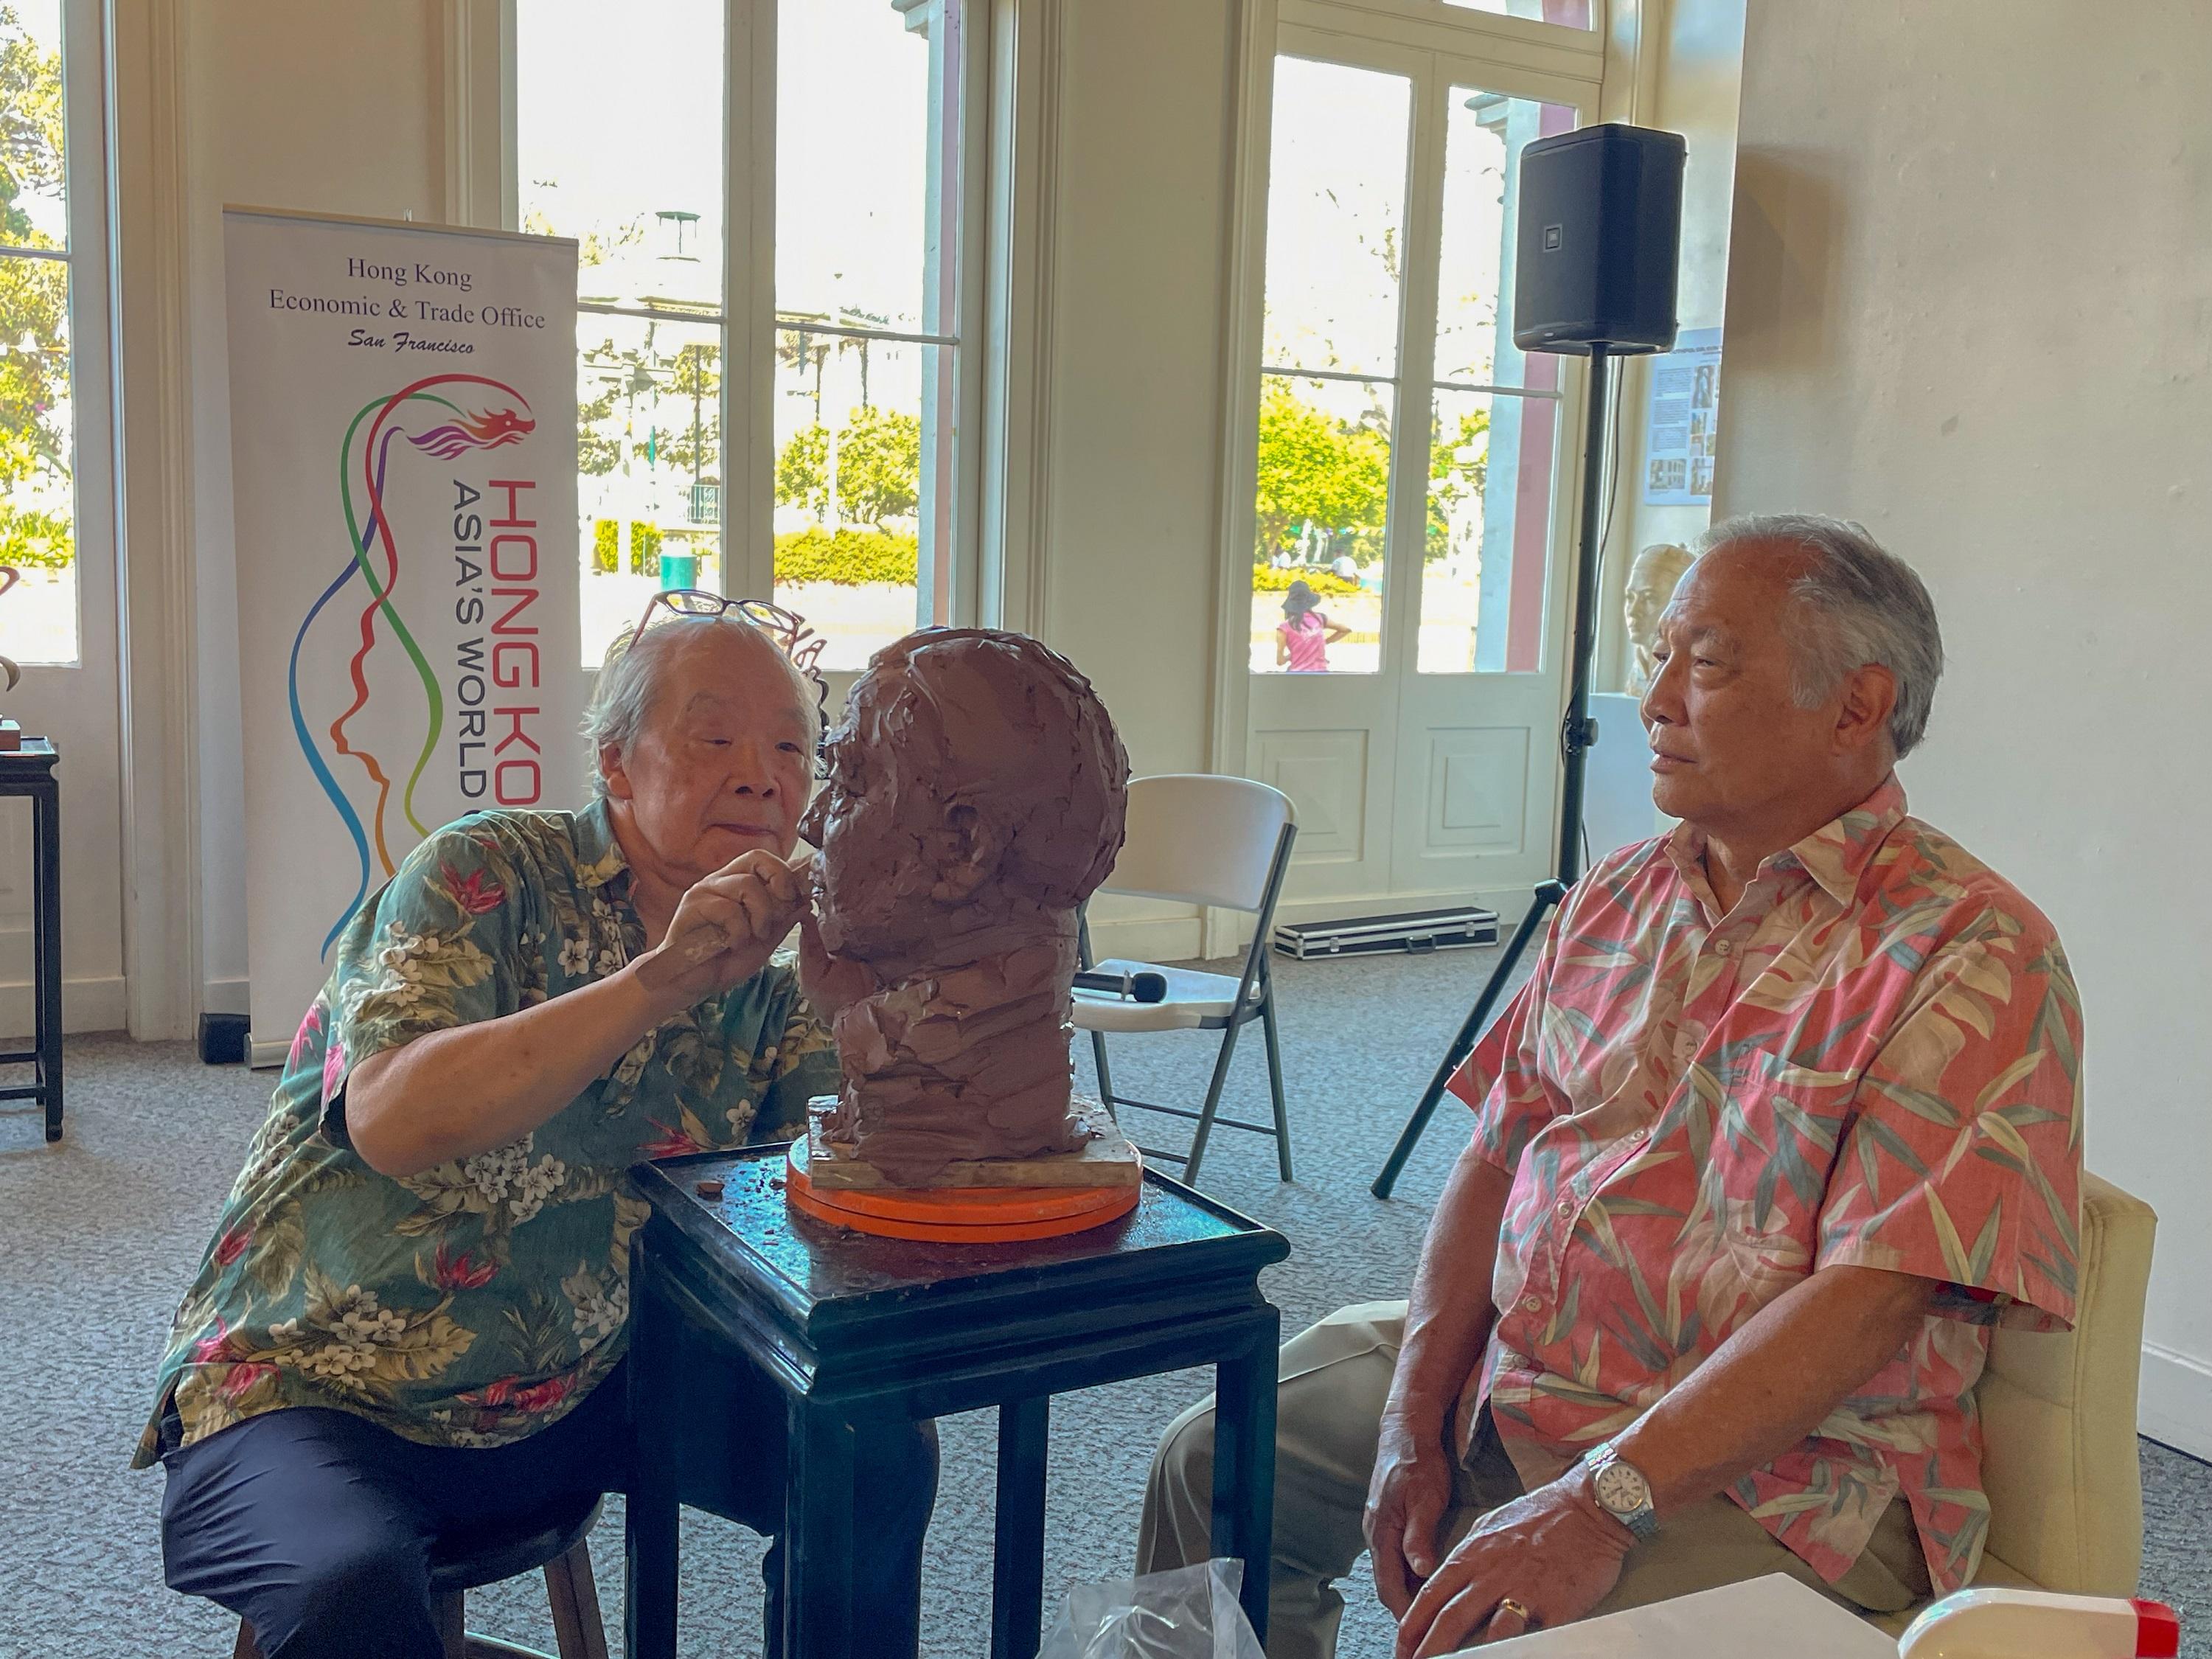 The Hong Kong Economic and Trade Office in San Francisco supported the “Chu Tat Shing Art Exhibition - Divine Land. Enduring Legends”, featuring the American debut of works by the internationally renowned sculptor from Hong Kong, which was held in Los Angeles from July 14 to 23 (Los Angeles time). Photo shows Chu (left) conducting a live sculpting demonstration.